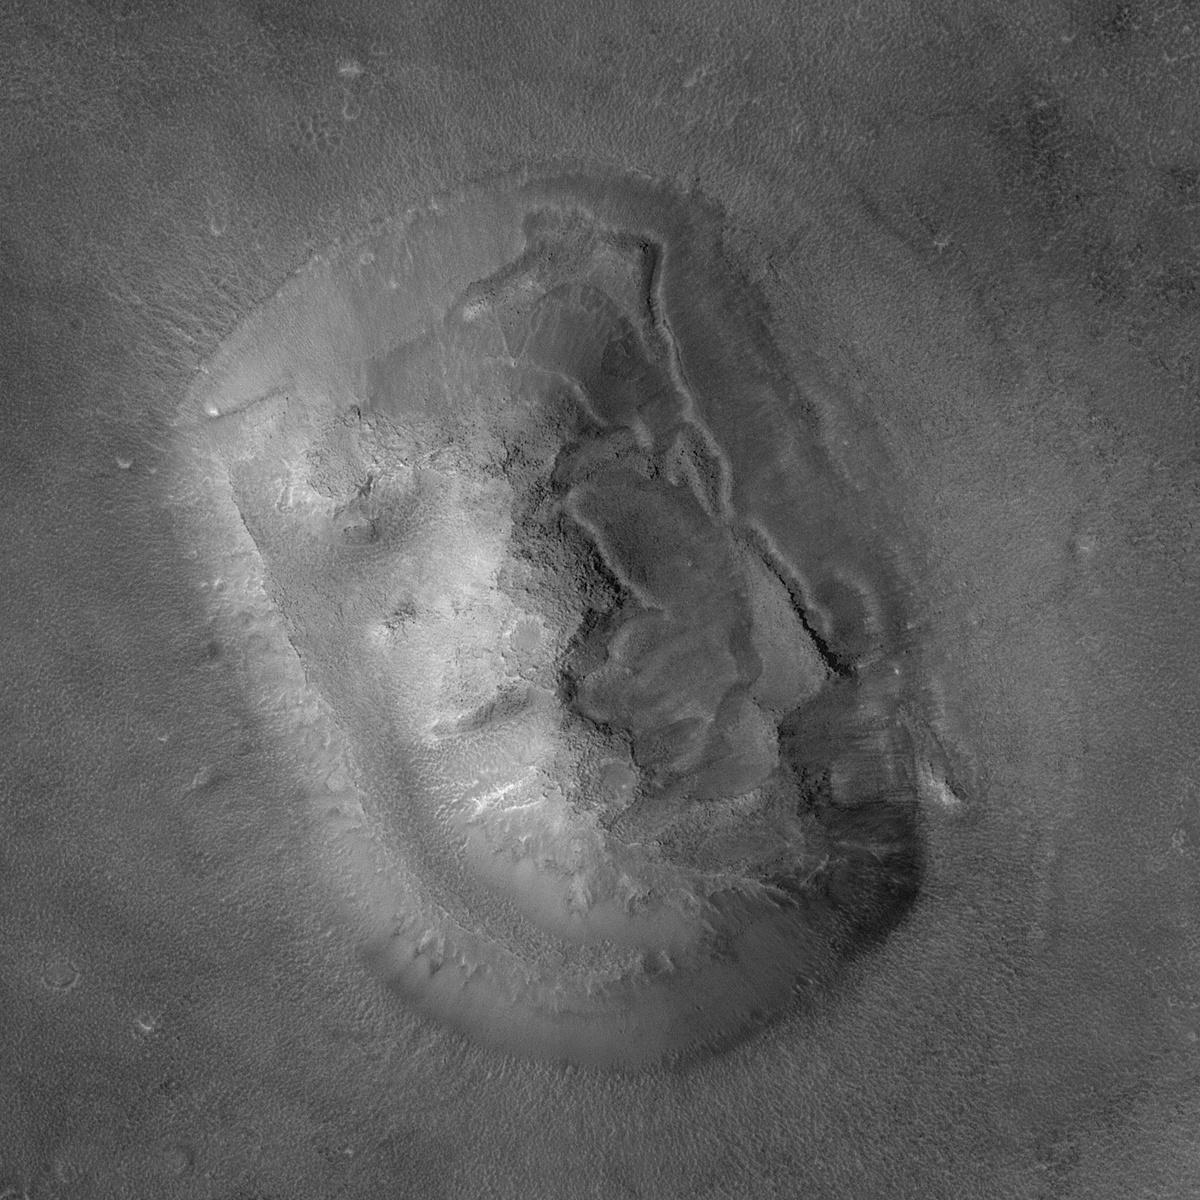 as tedious as the stone face of mars watches phobos